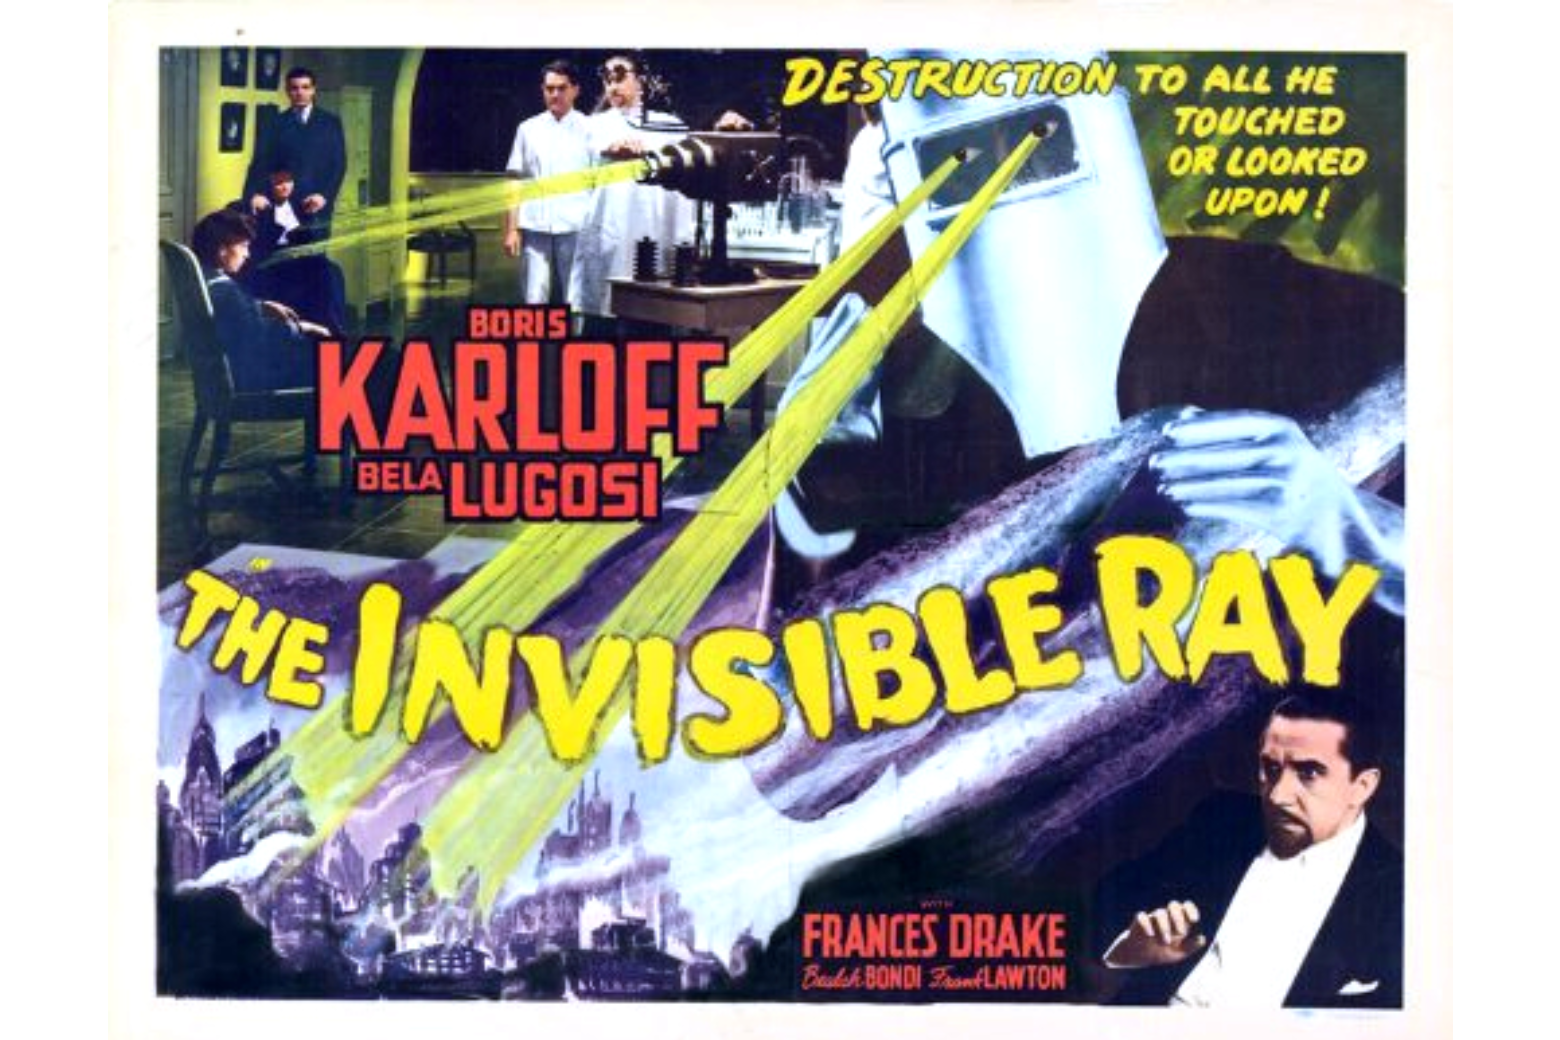 The Invisible Ray film poster